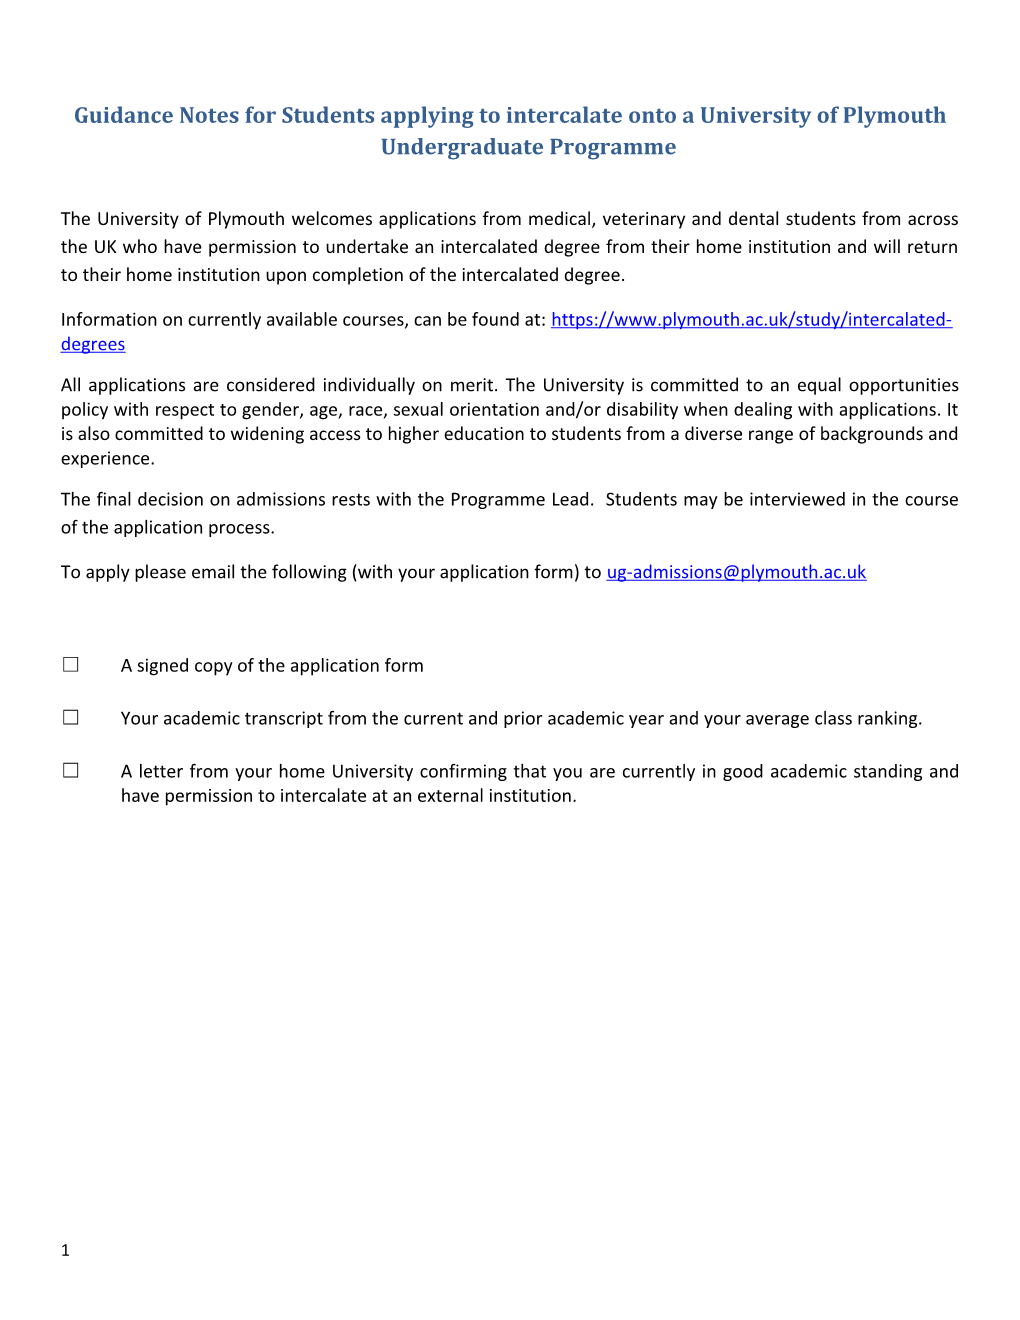 Guidance Notes for Students Applying to Intercalate Onto a University of Plymouth Undergraduate